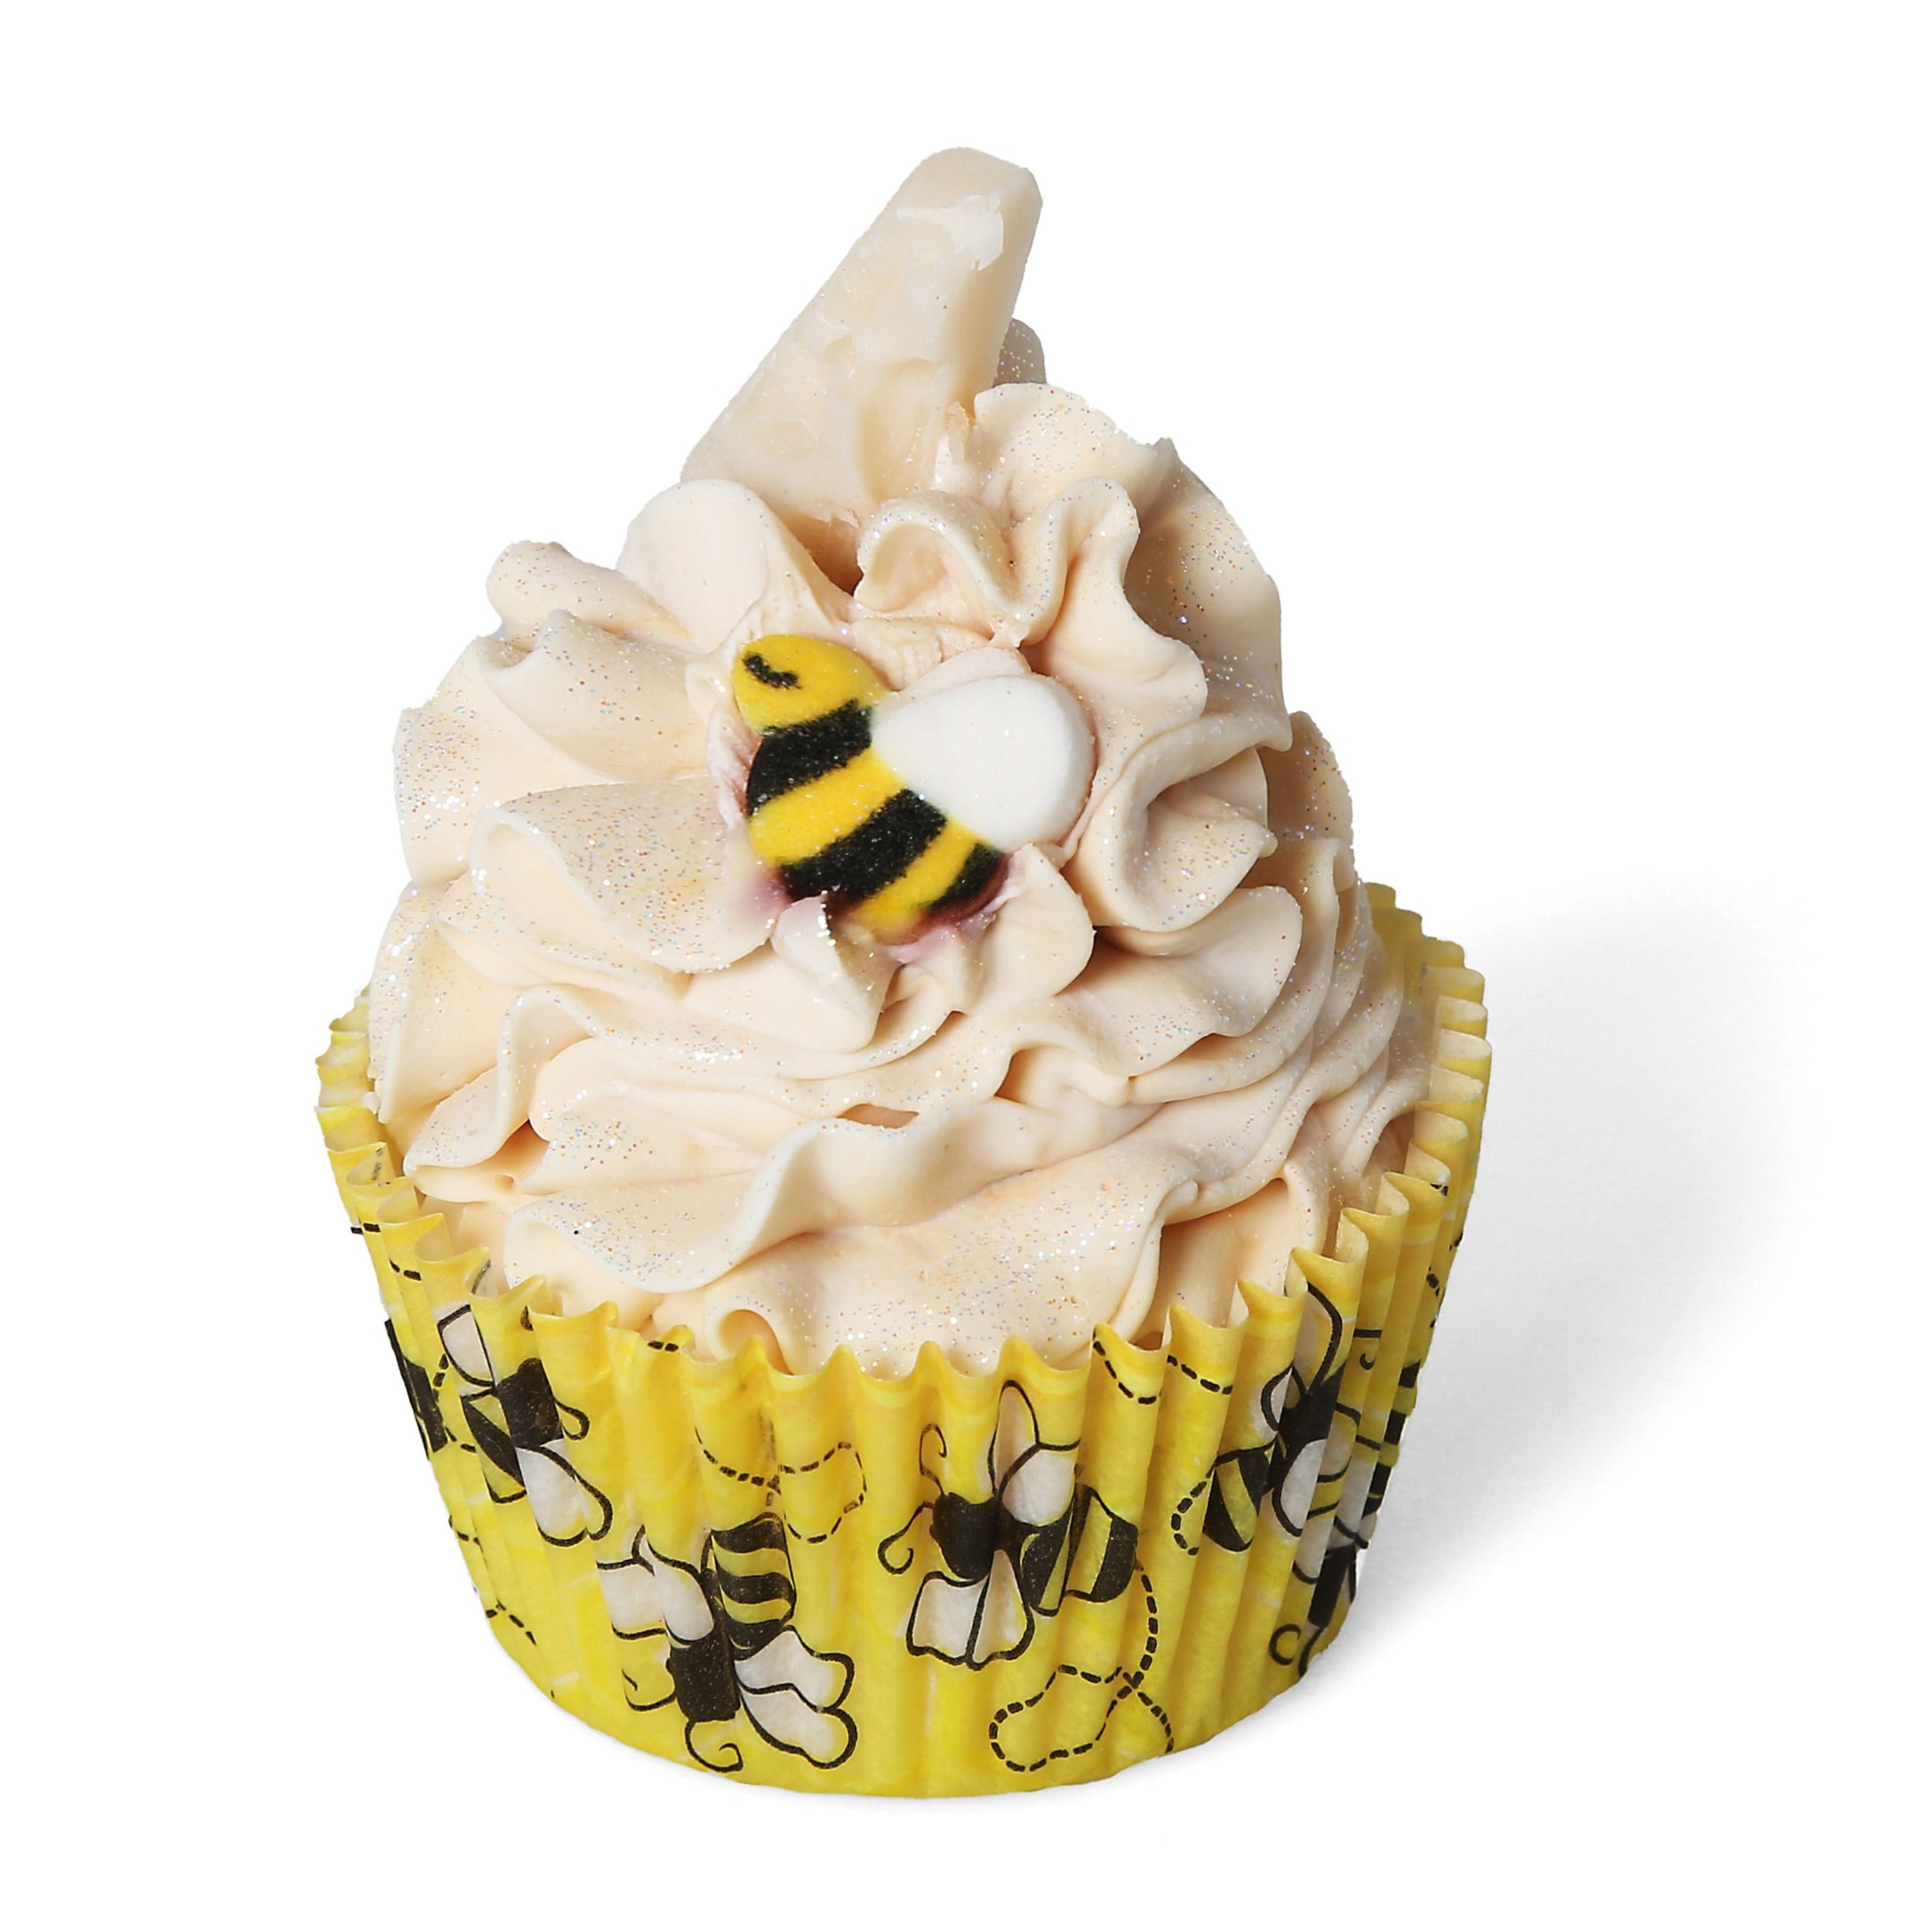 Bubble bee themed soap cupcake with yellow liner with bee pattern. Cream colored soap frosting topped with gold glitter and small bee shaped decoration.